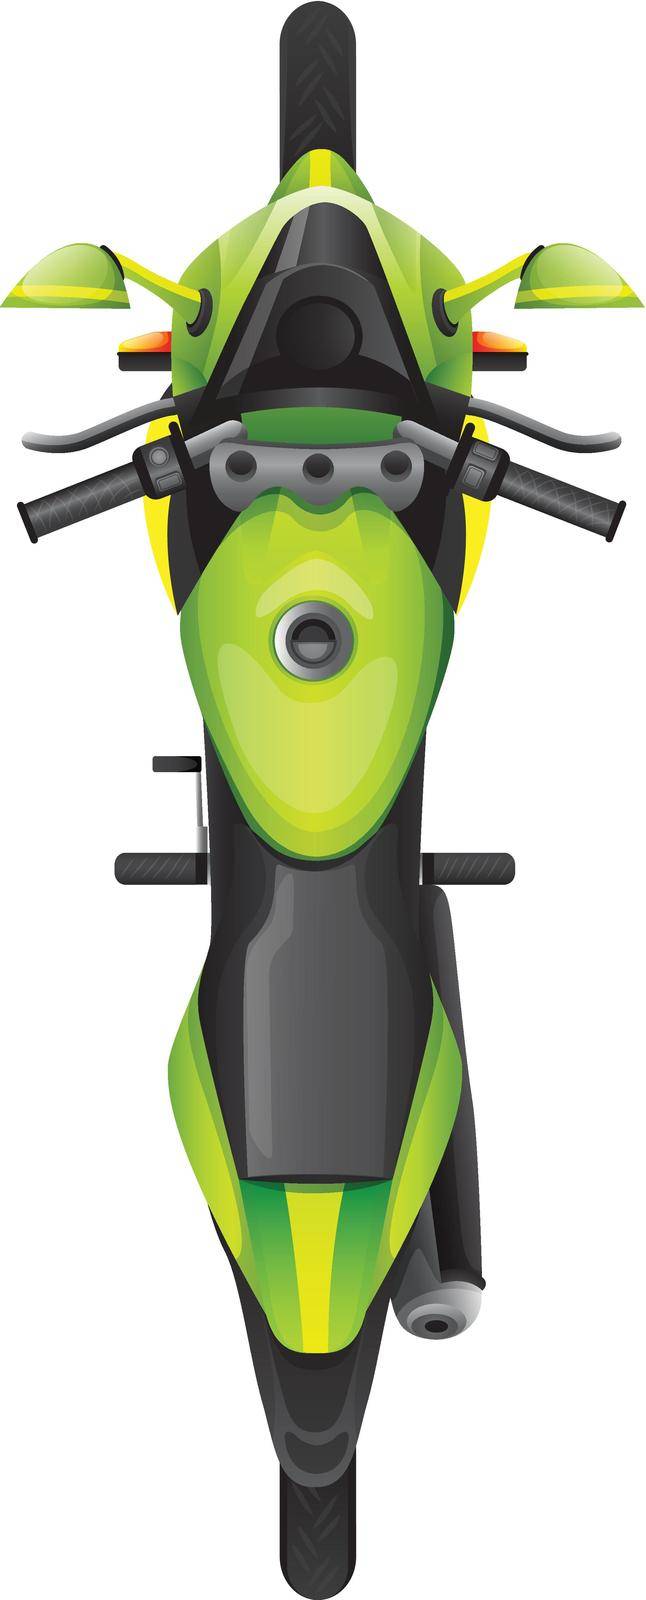 Illustration of a topview of a motorcycle on a white background